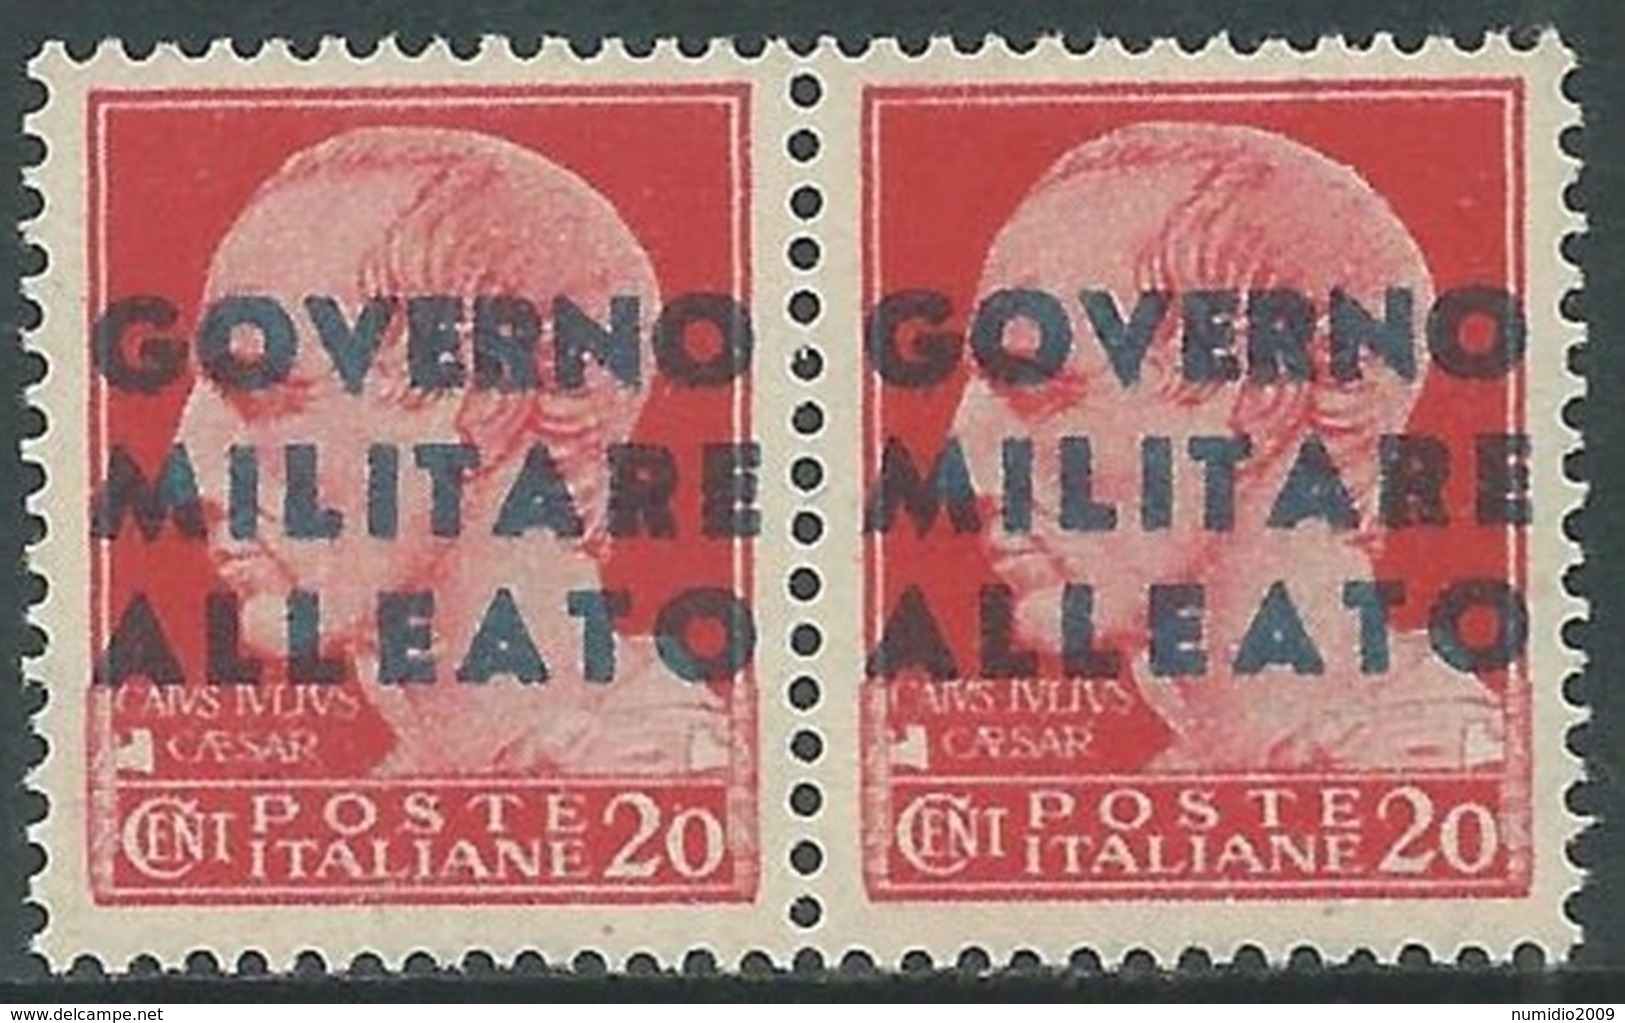 1943 OCCUPAZIONE ANGLO AMERICANA NAPOLI 20 CENT COPPIA MNH ** - UR44-7 - Occ. Anglo-américaine: Naples